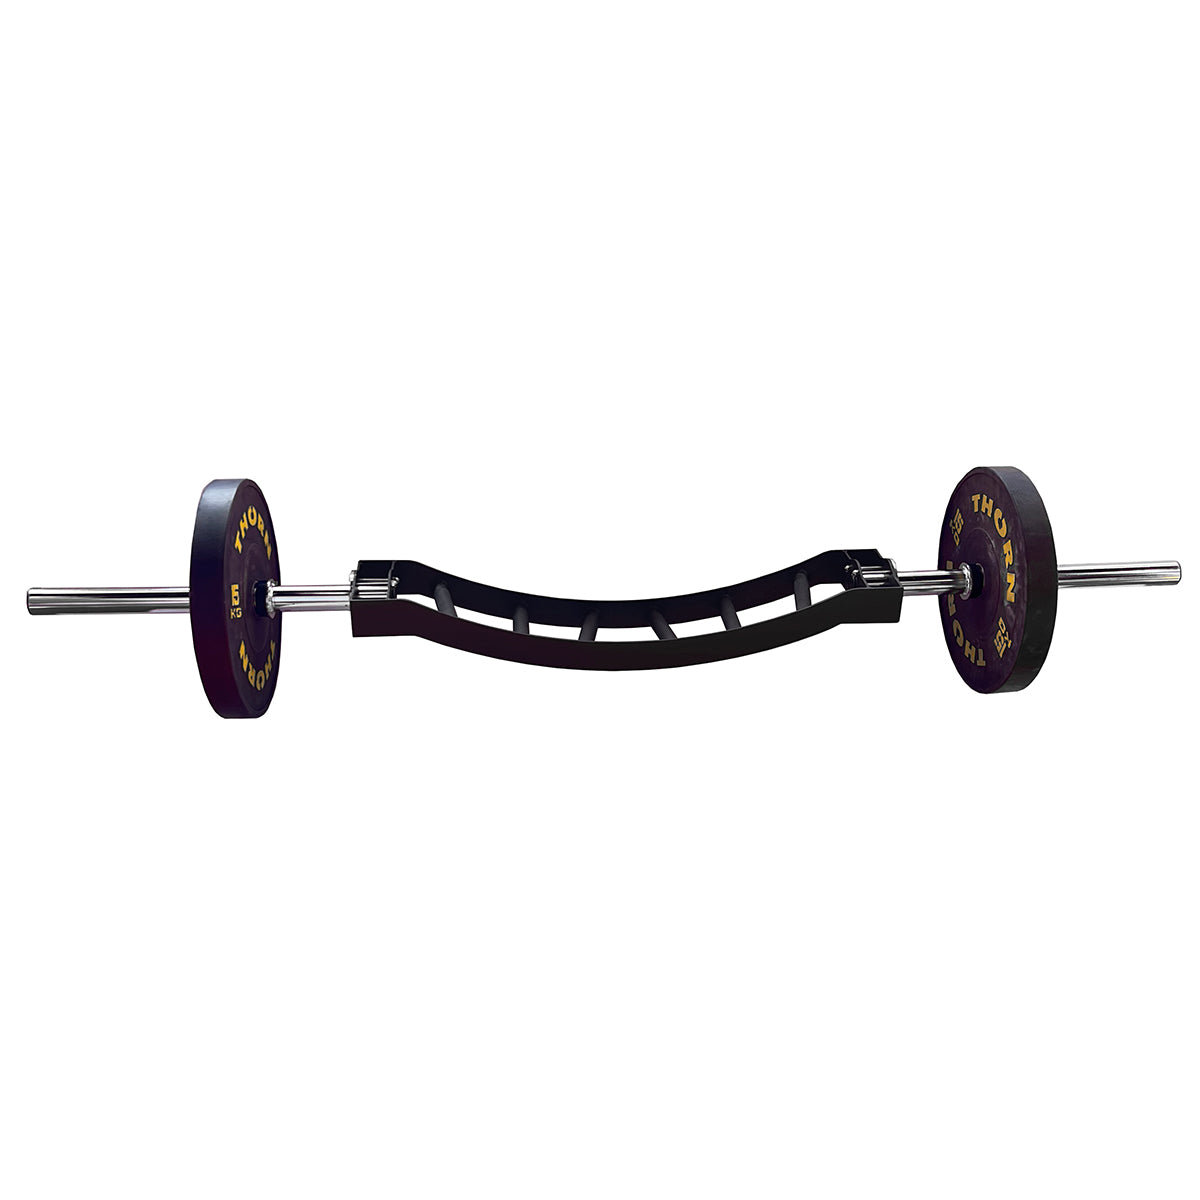 Gryf THORN FIT Cambered Bench Press bar